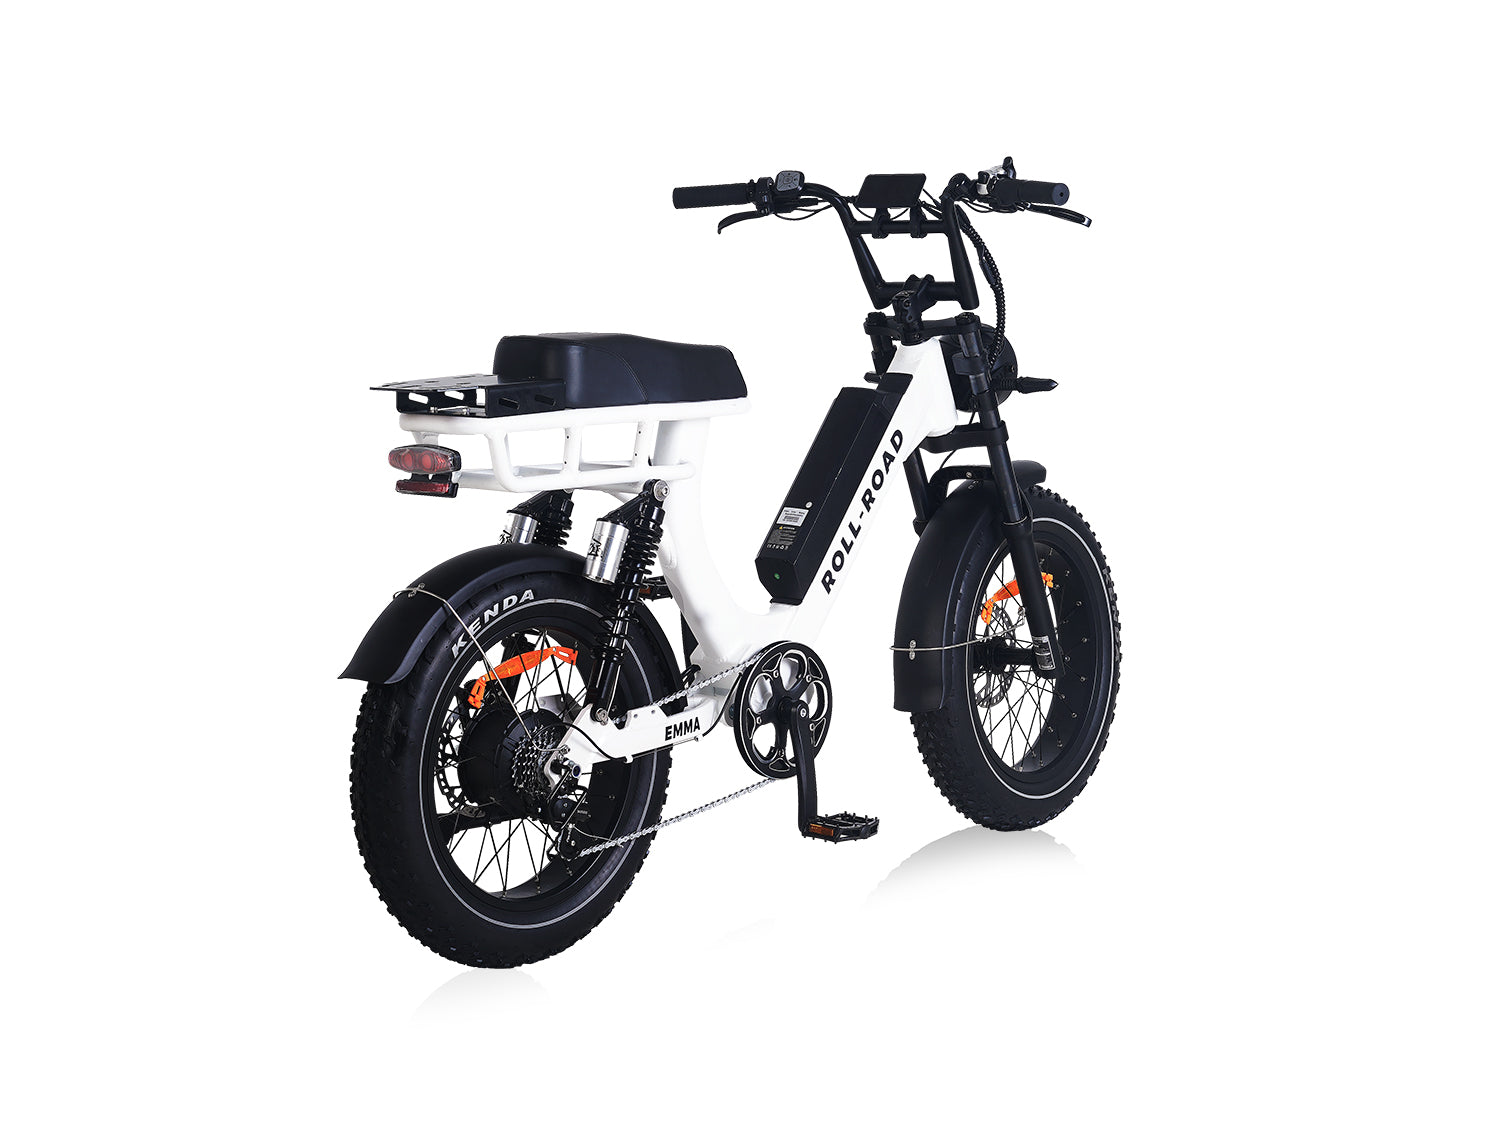 EMMA Long Range |Moped-style Ebike for Adults|400LB Heavy Rider|Step Through Electric Bike 4